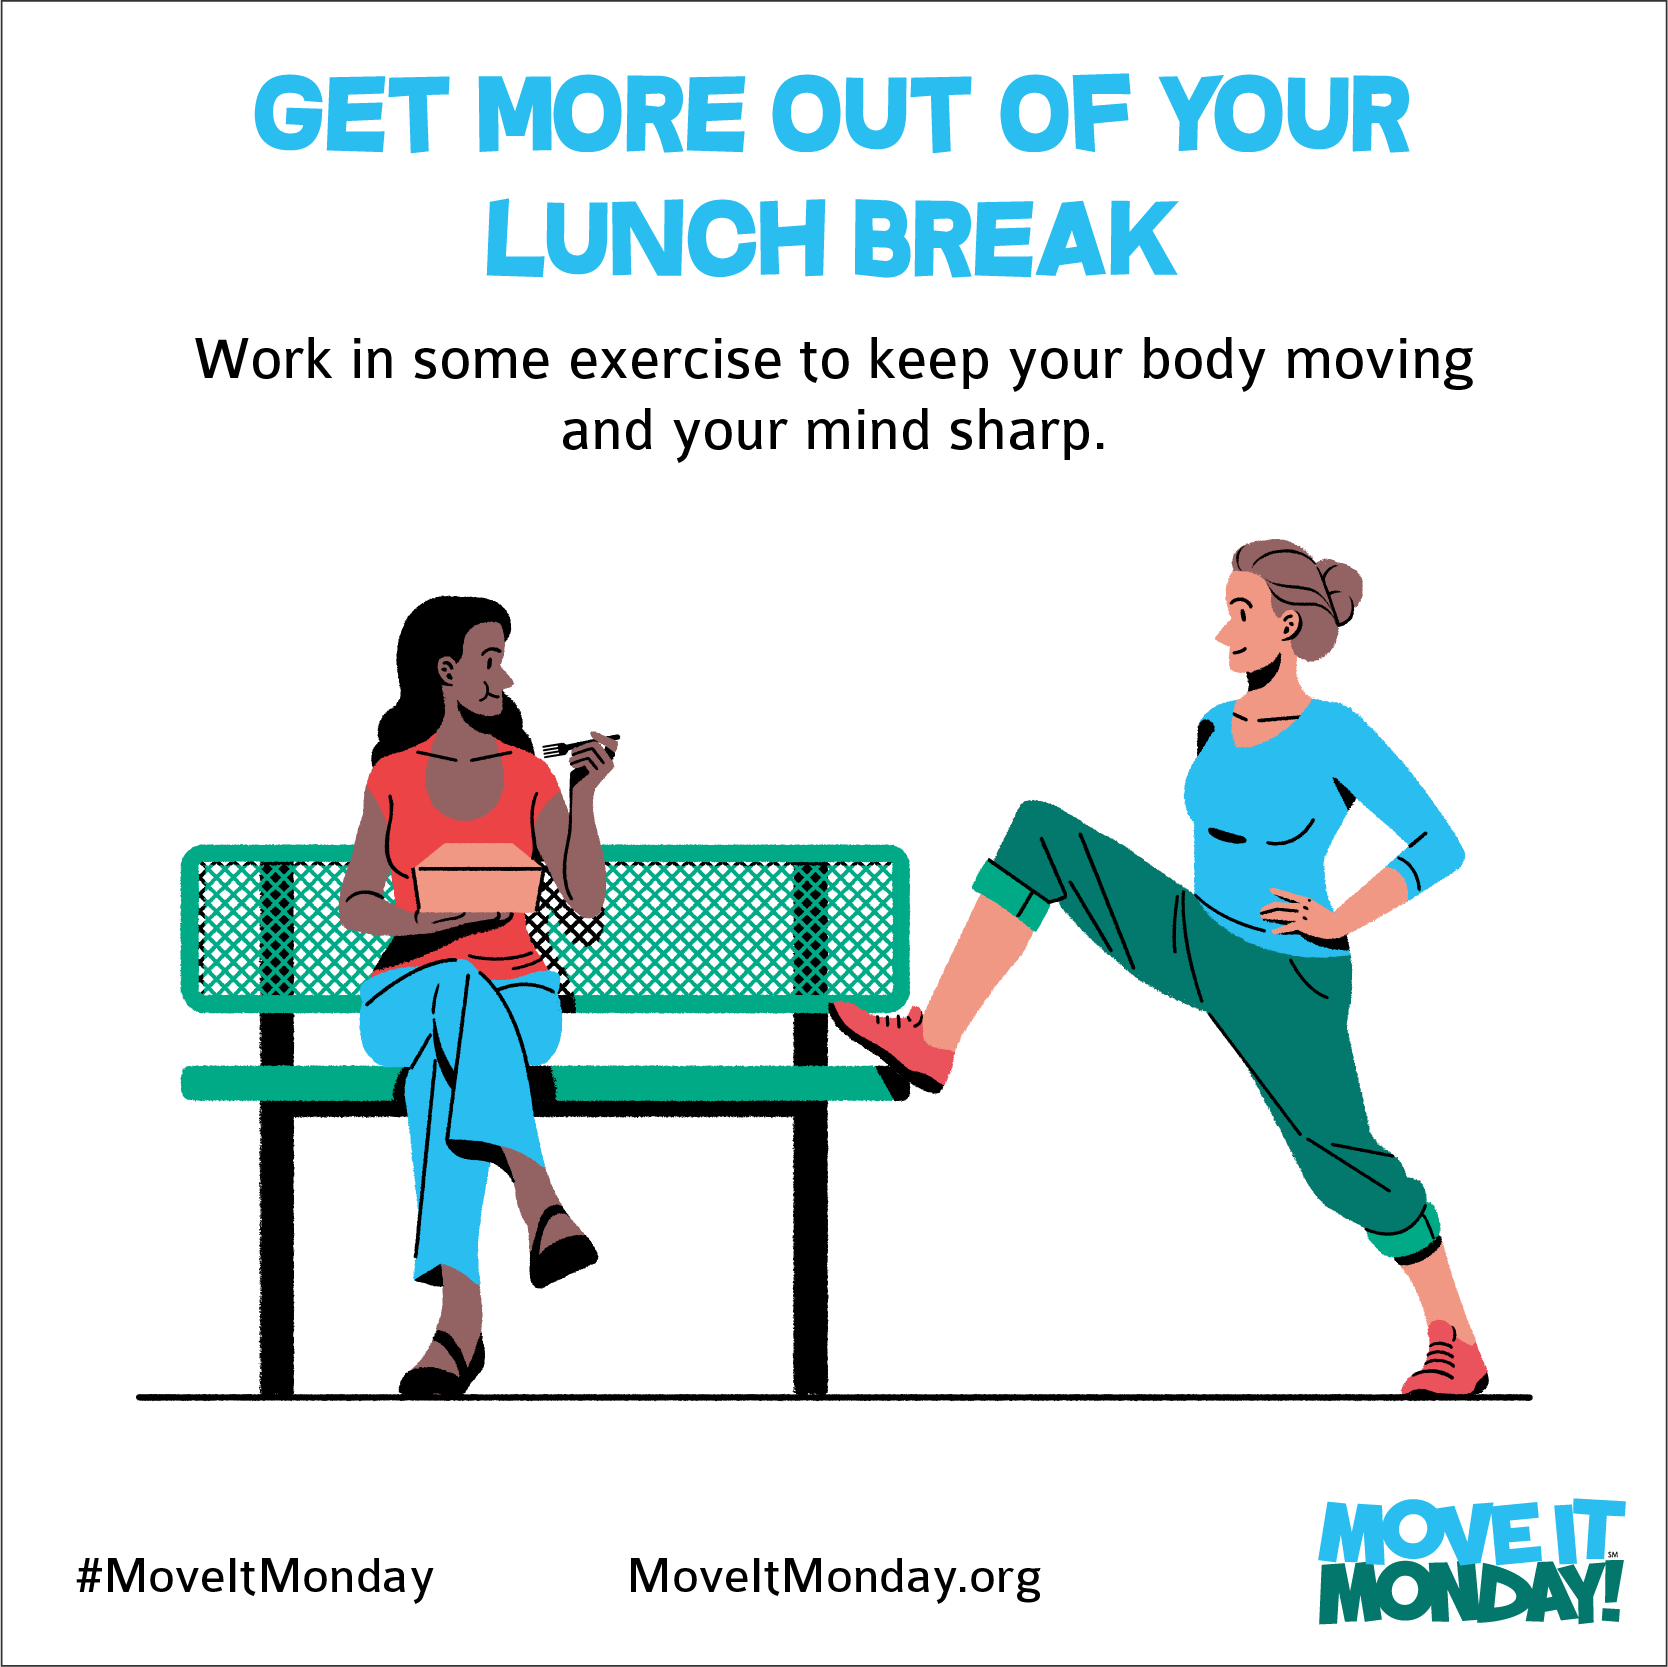 Move It Monday Lunch Break Workout Routine For More Energy